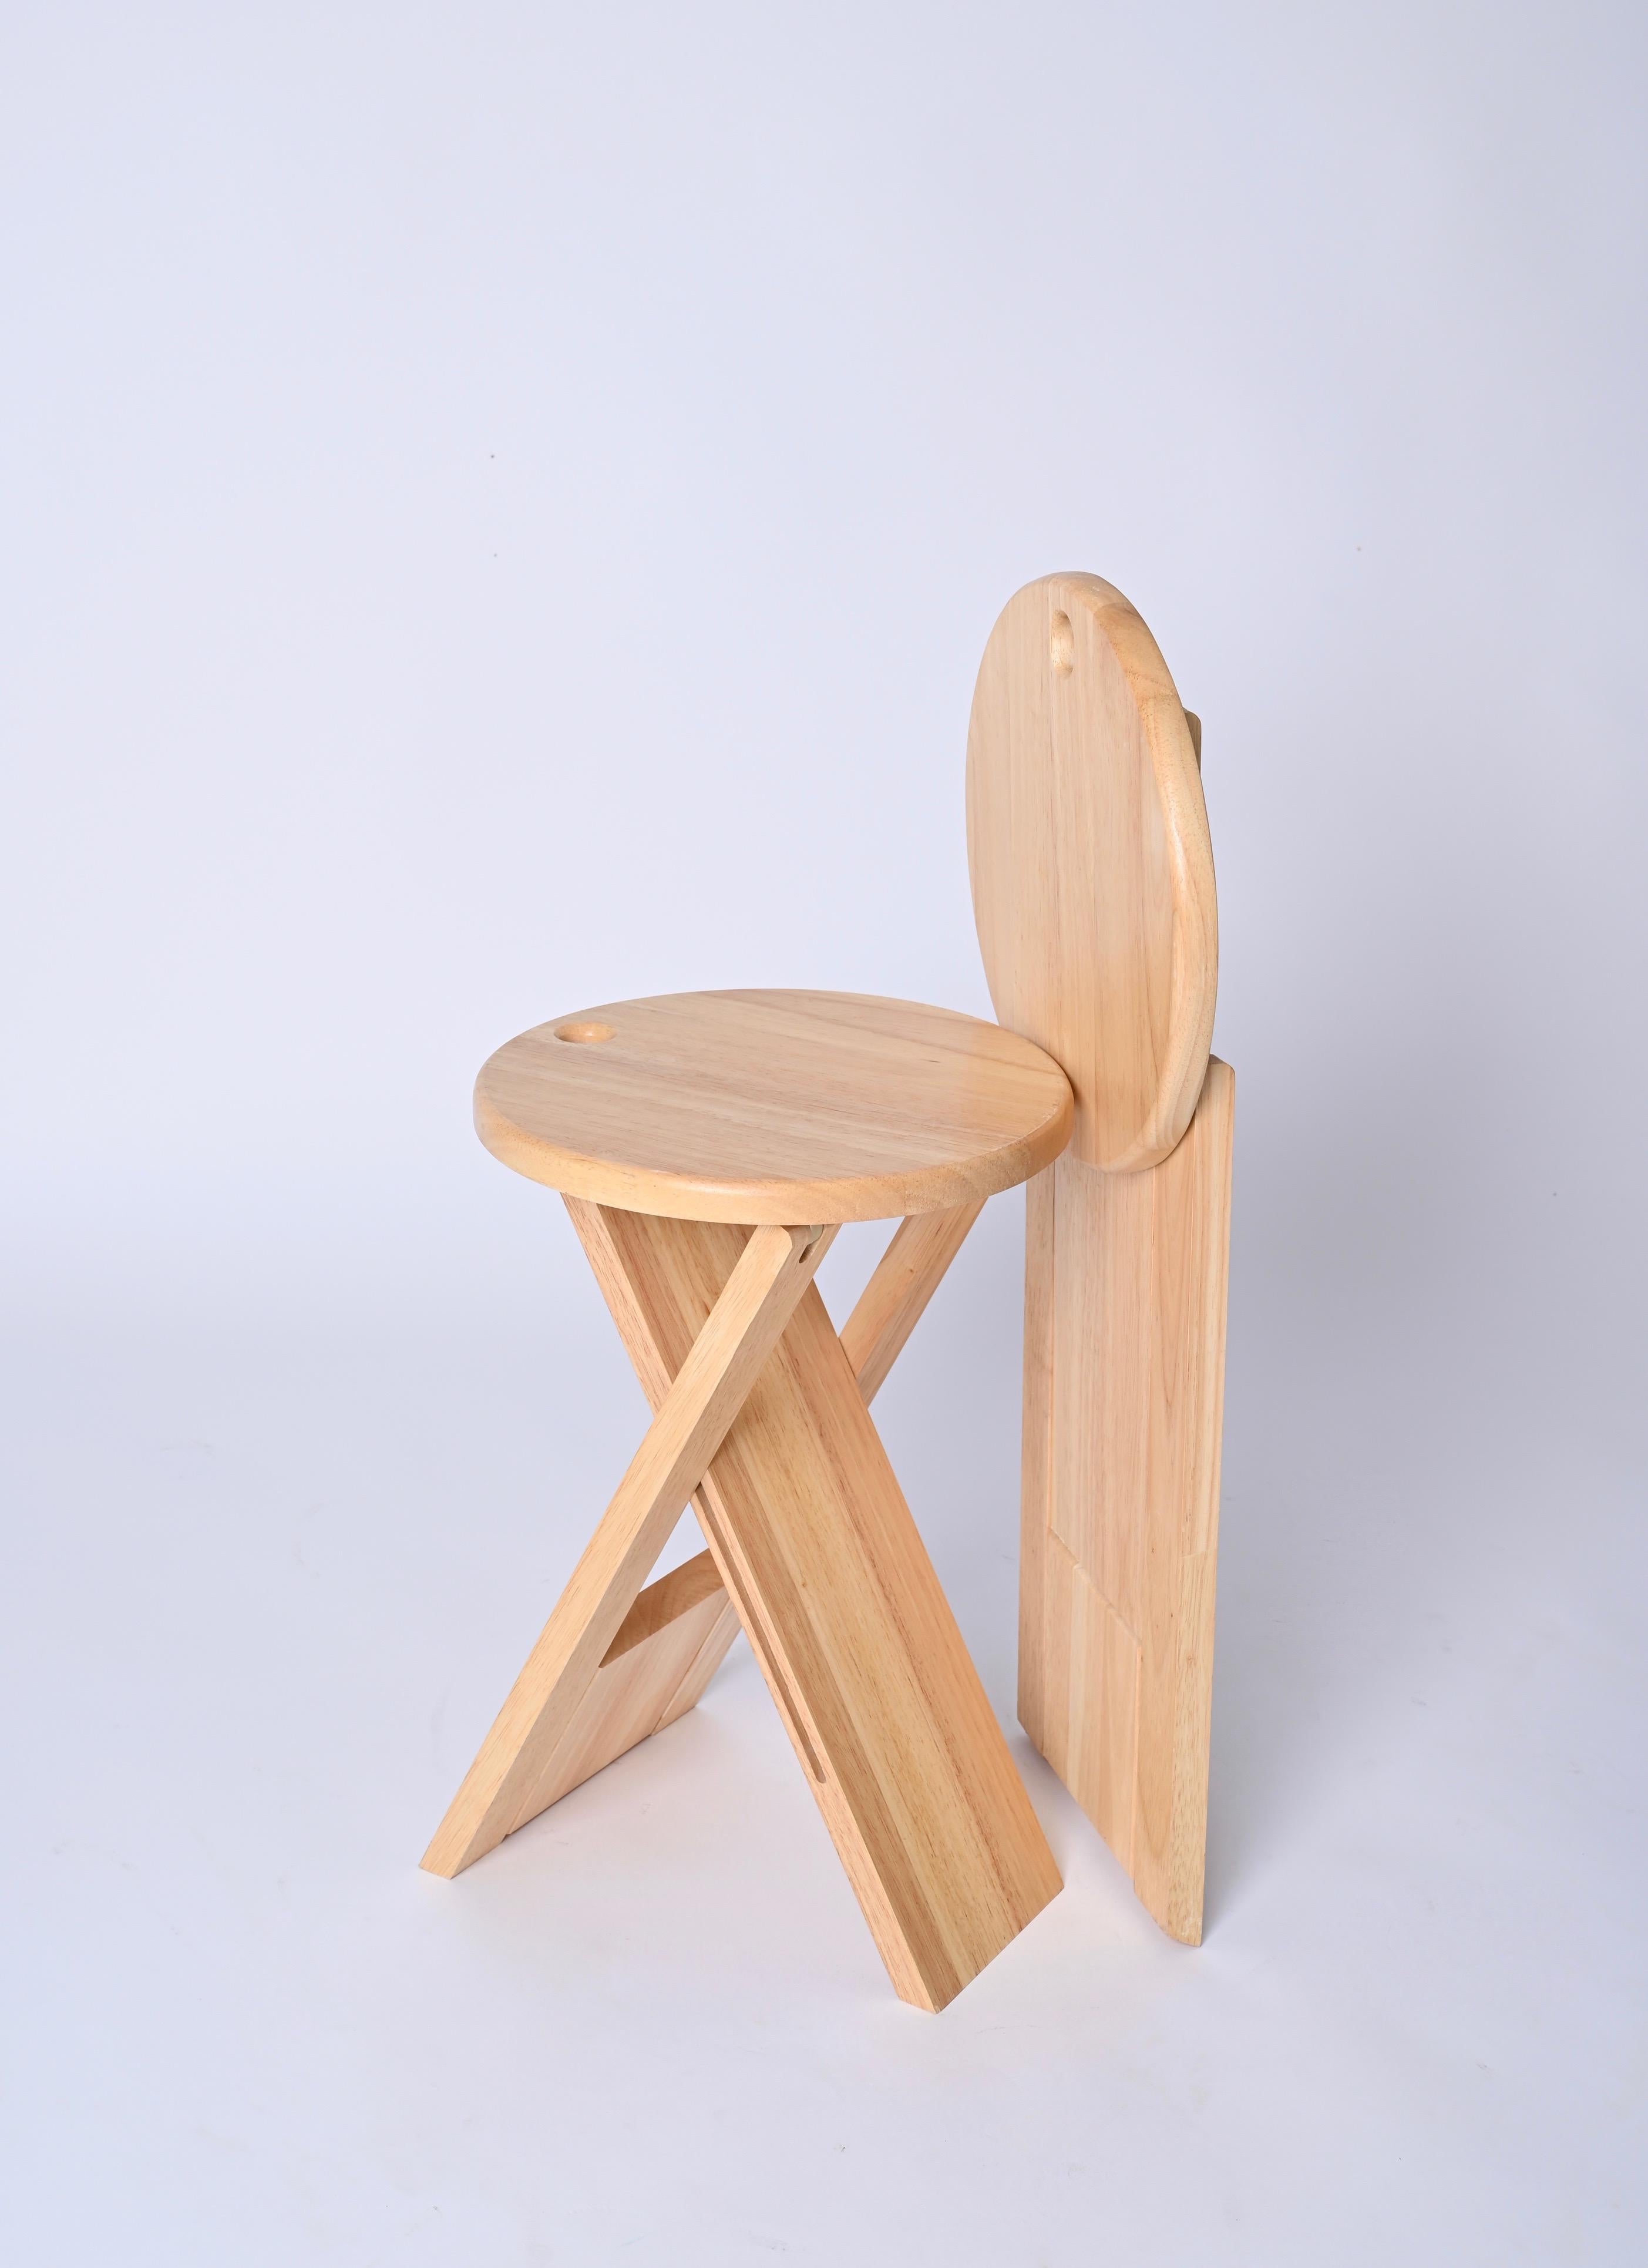 Lovely pair of foldable stools designed by Roger Tallon and produced by Sentou in France in the 1970s. 

These TS stools are fully made in a beautiful maple wood and were ingeniously designed to fold completely flat with the possibility to be hung